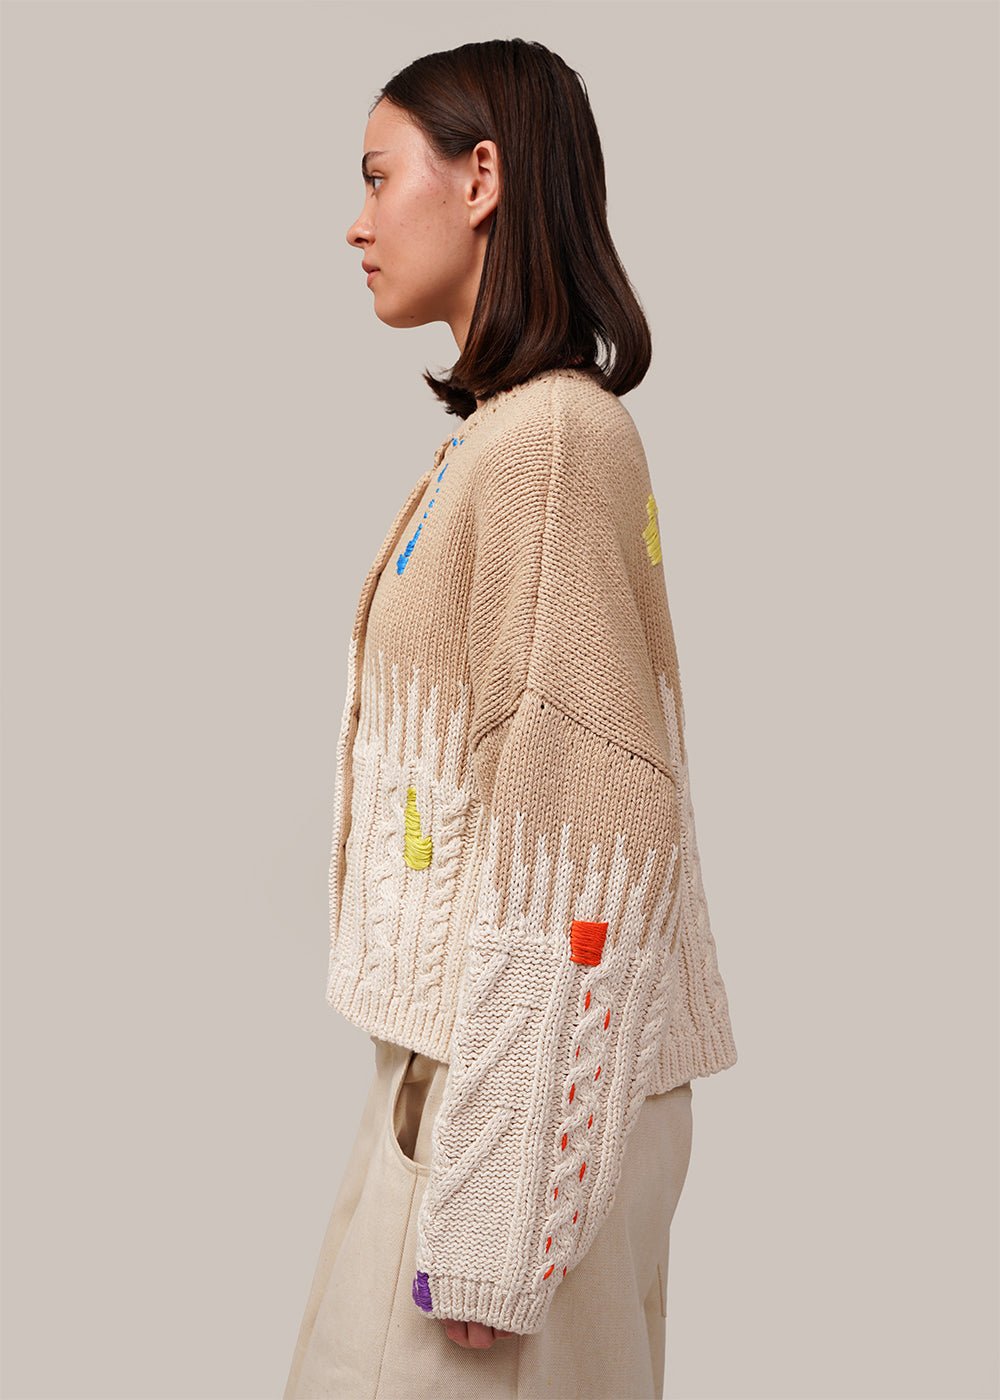 Cordera Cotton Embroidered Cardigan - New Classics Studios Sustainable Ethical Fashion Canada